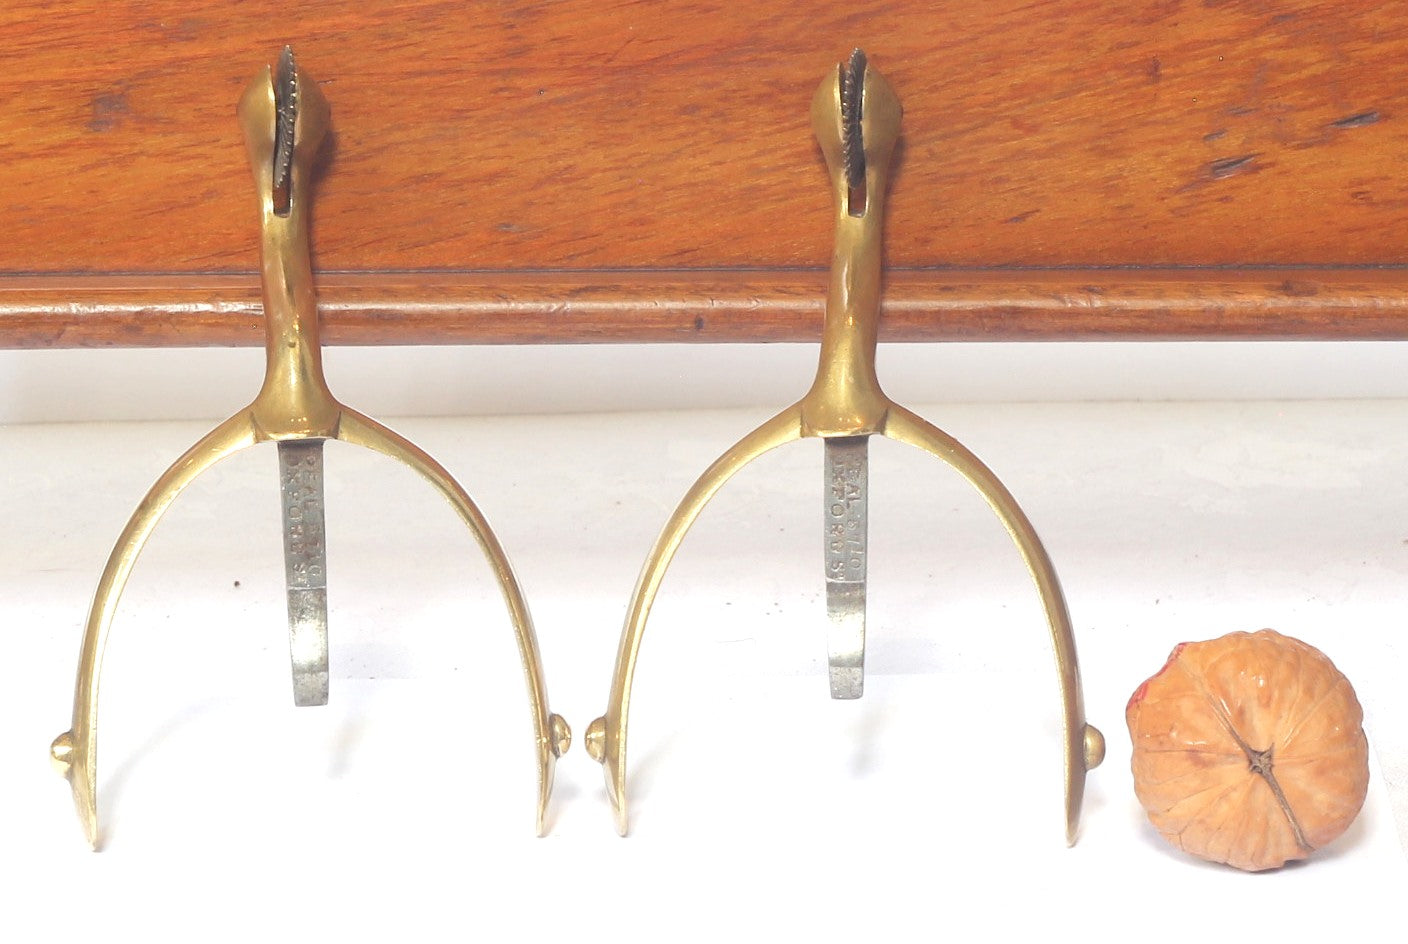 Mahogany Stand or Rack for Officers Mess Dress Box Spurs